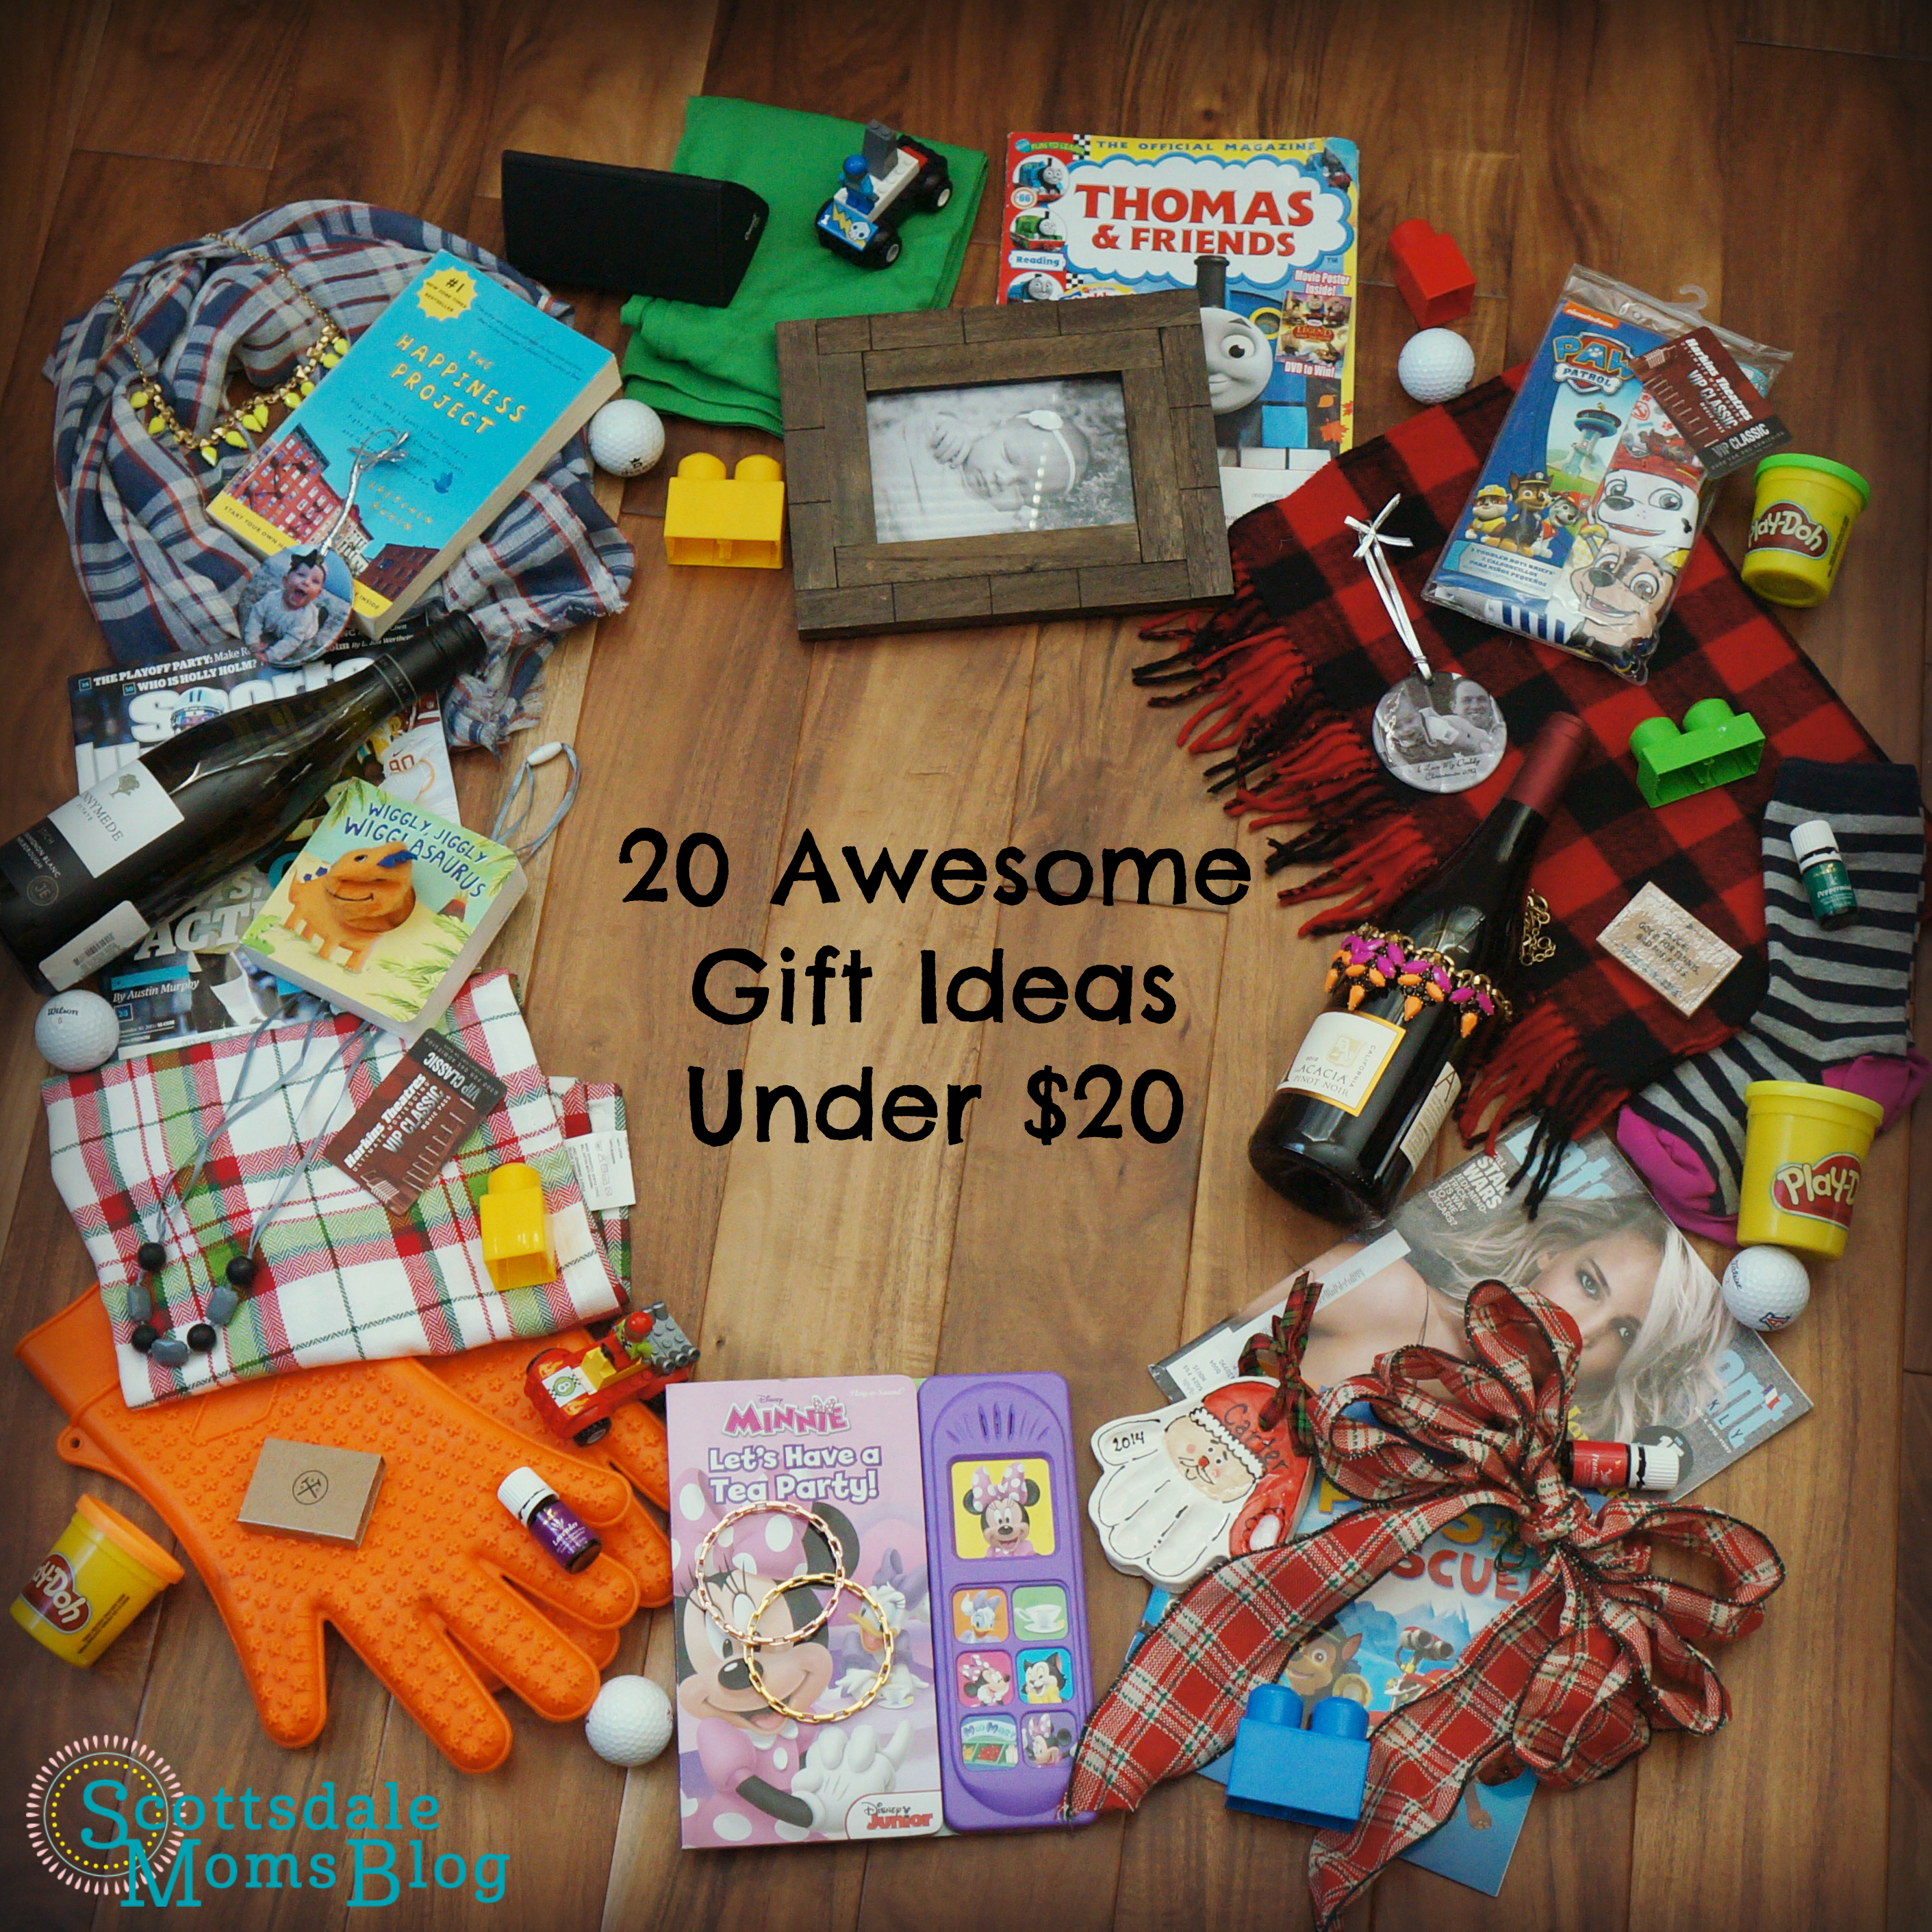 20 Awesome Gift Ideas Under $20